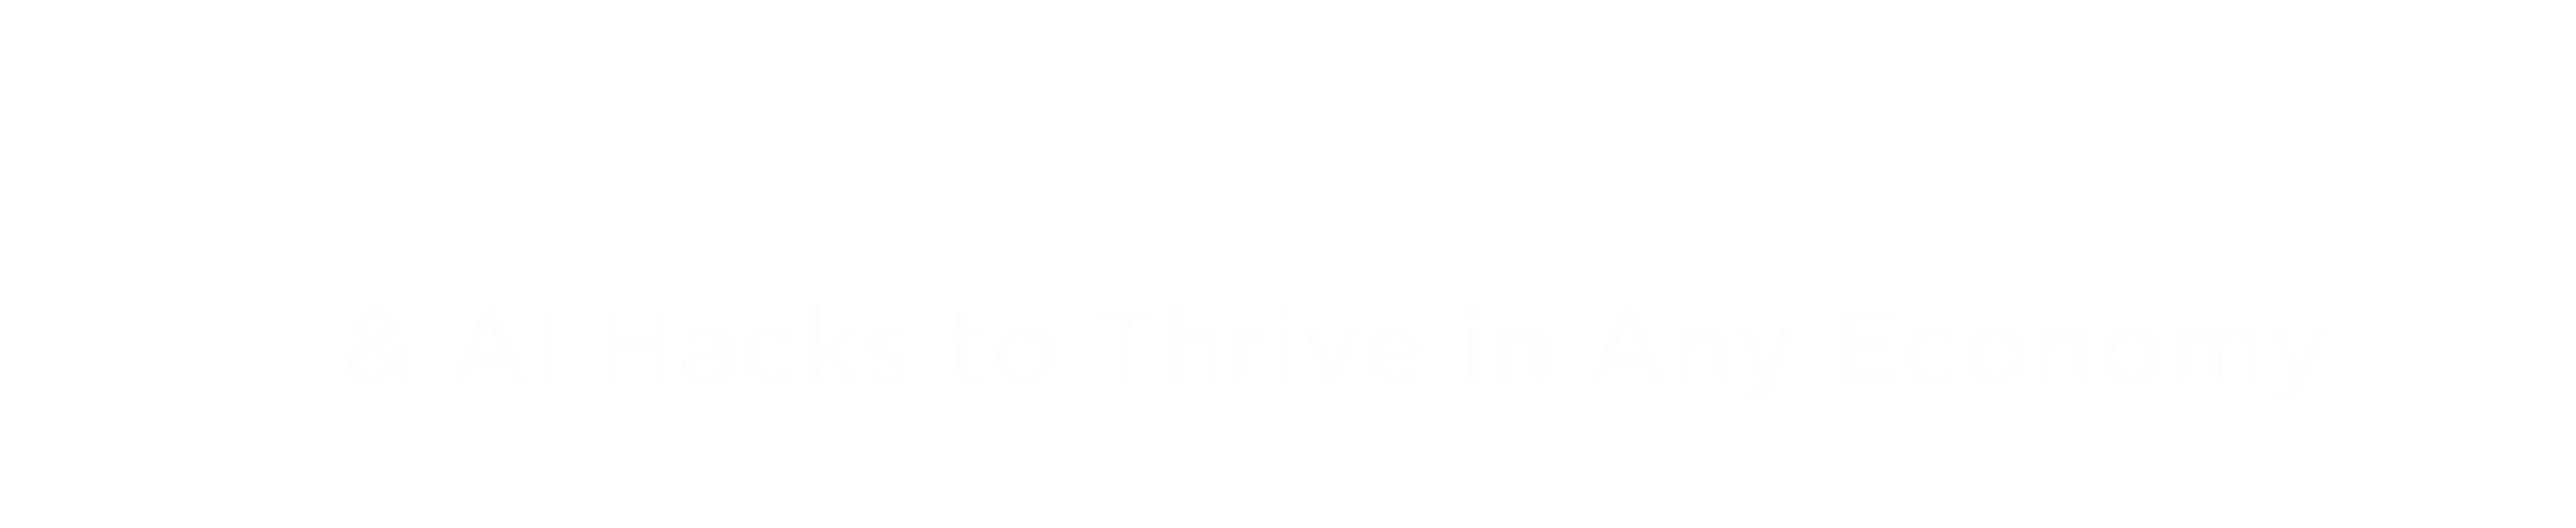 Spiritual Sales Tools To Thrive in a Recession